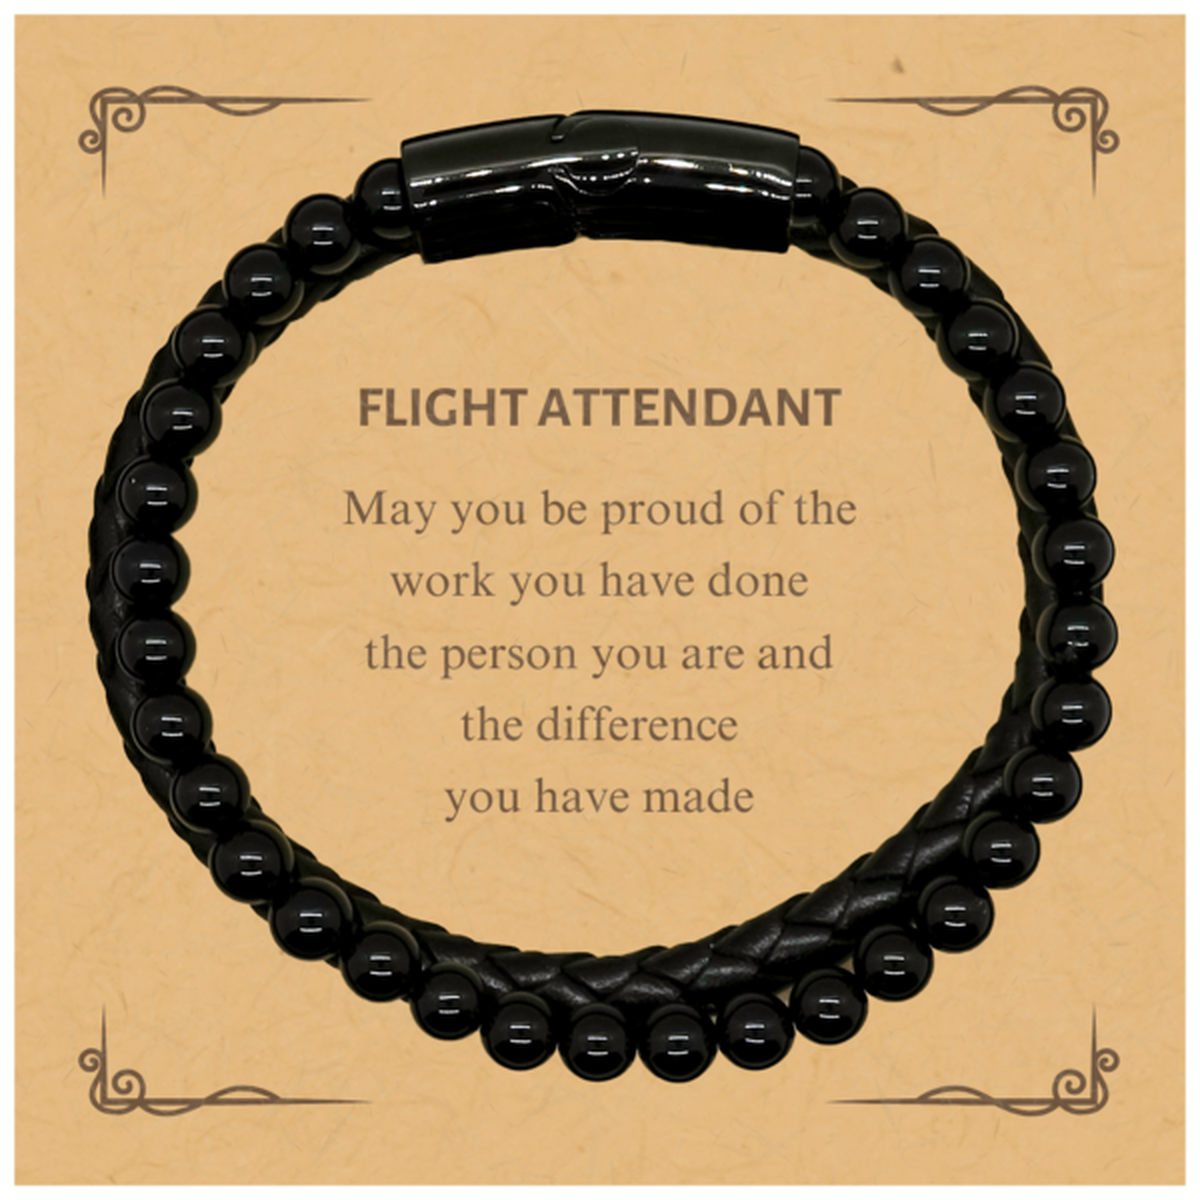 Flight Attendant May you be proud of the work you have done, Retirement Flight Attendant Stone Leather Bracelets for Colleague Appreciation Gifts Amazing for Flight Attendant